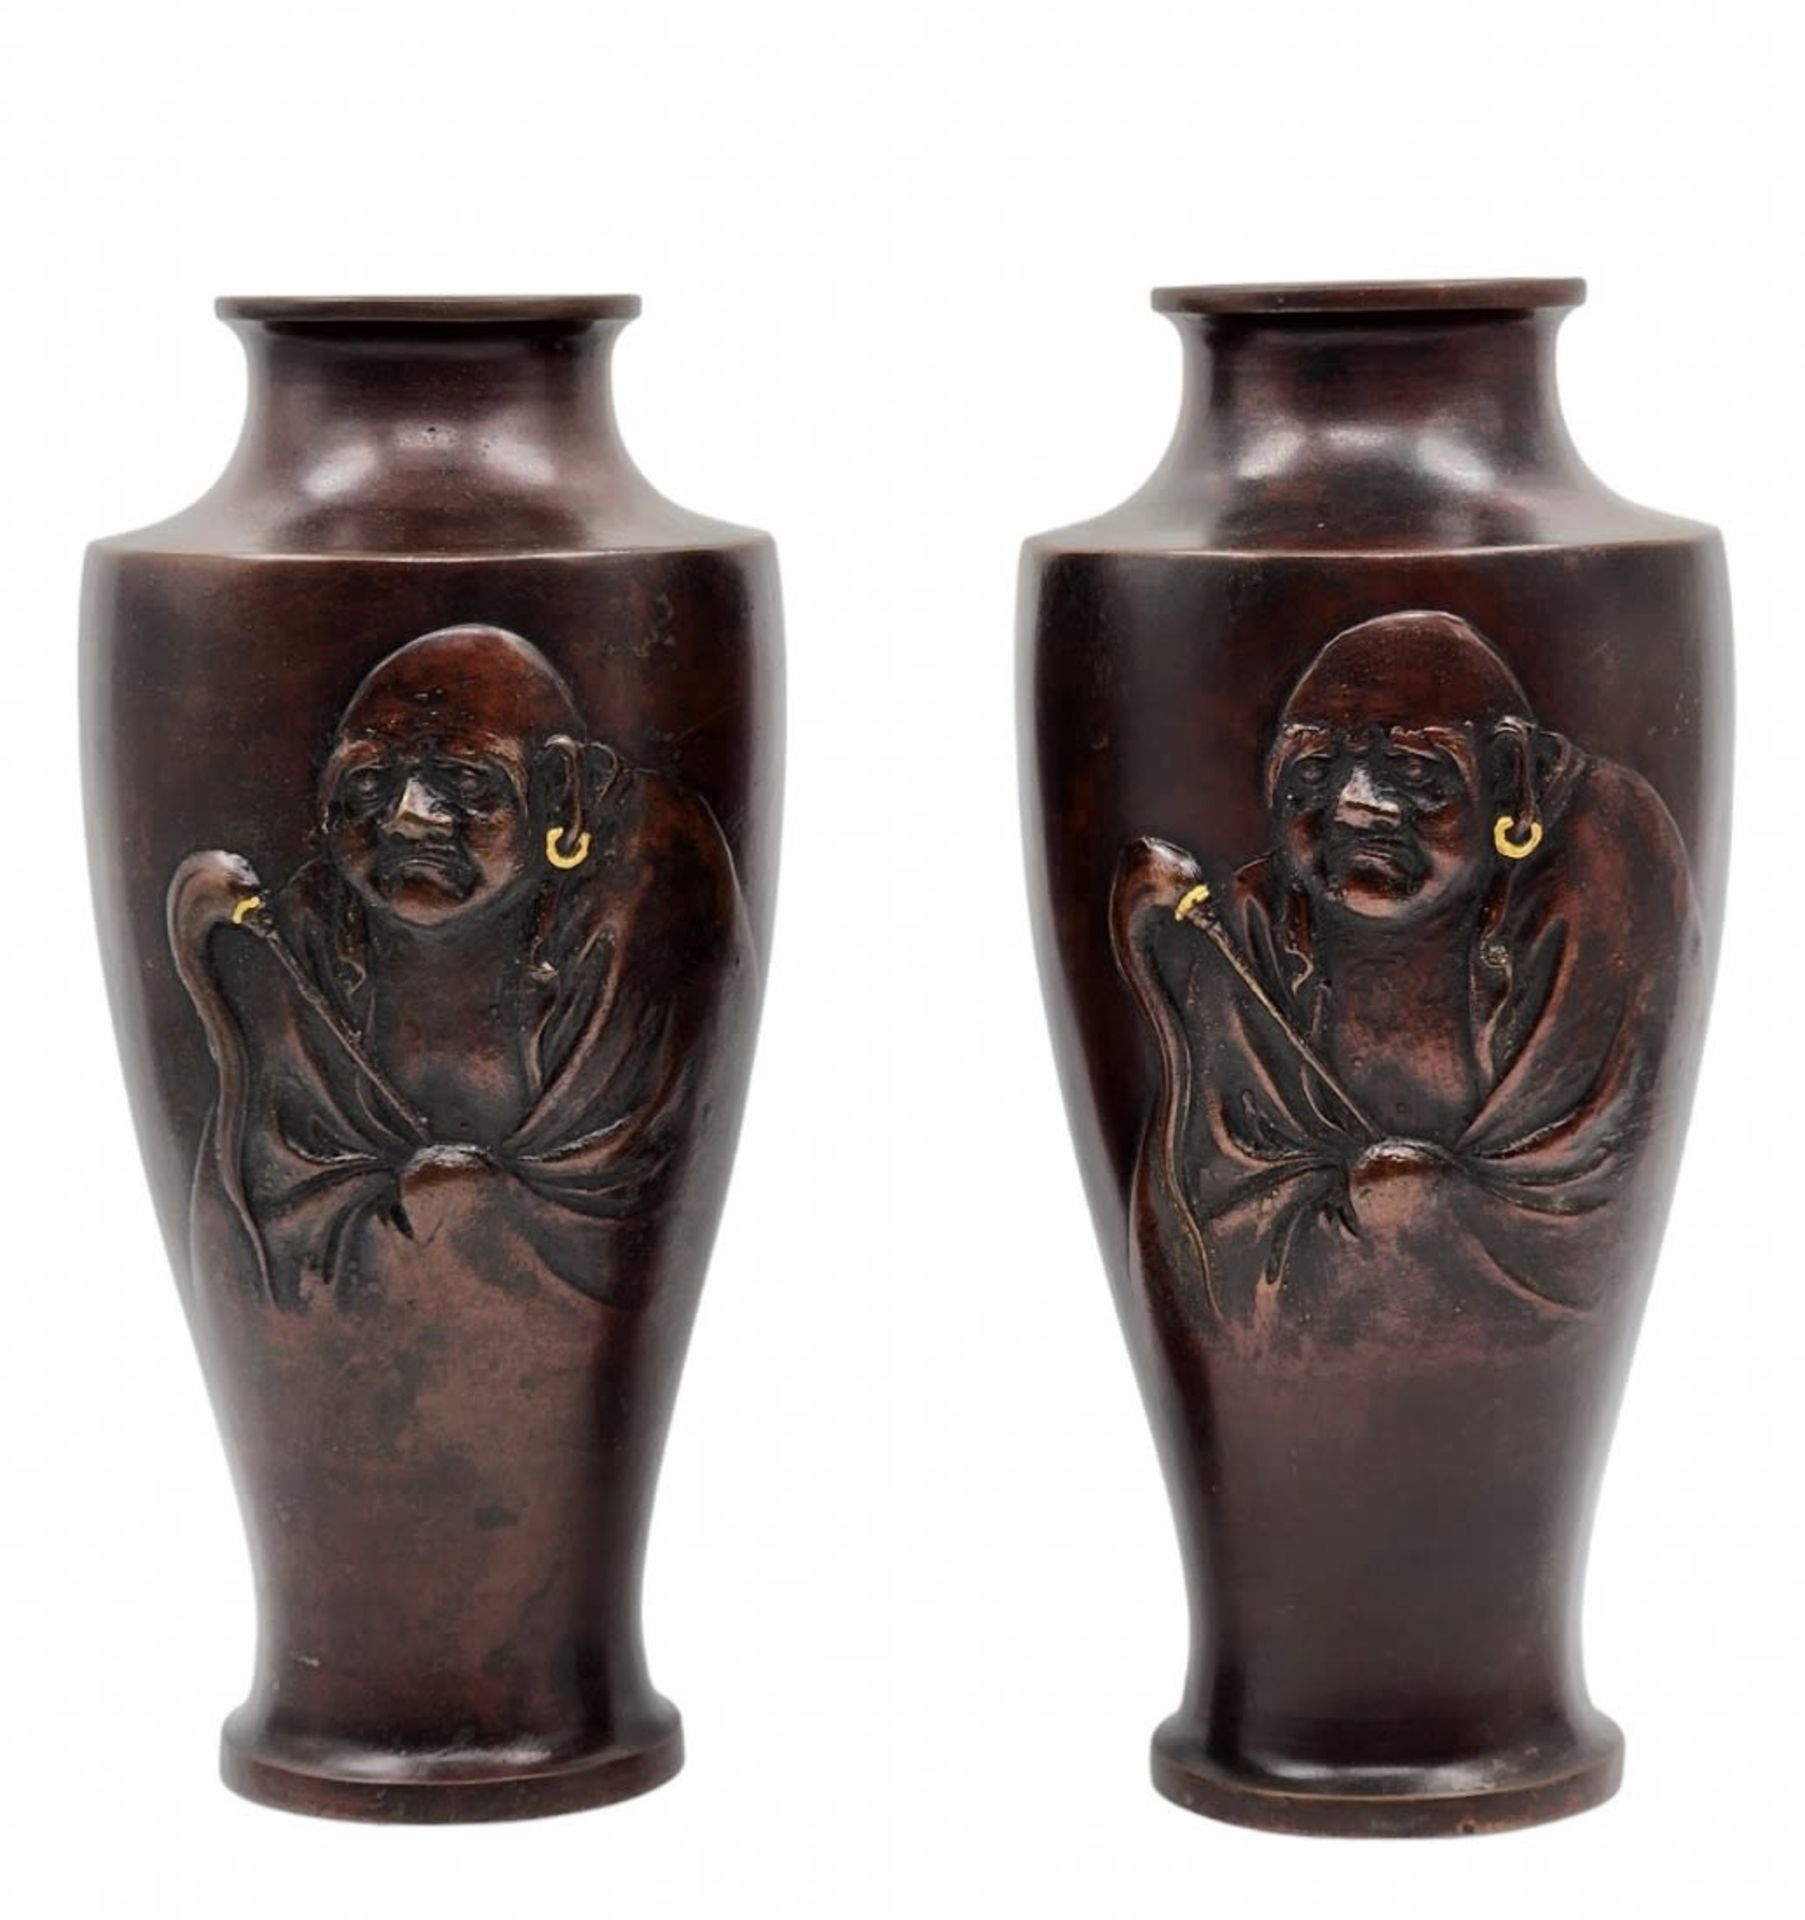 A pair of antique Japanese bronze jugs from the 'Meiji Period', end of the 19th century, unsigned,